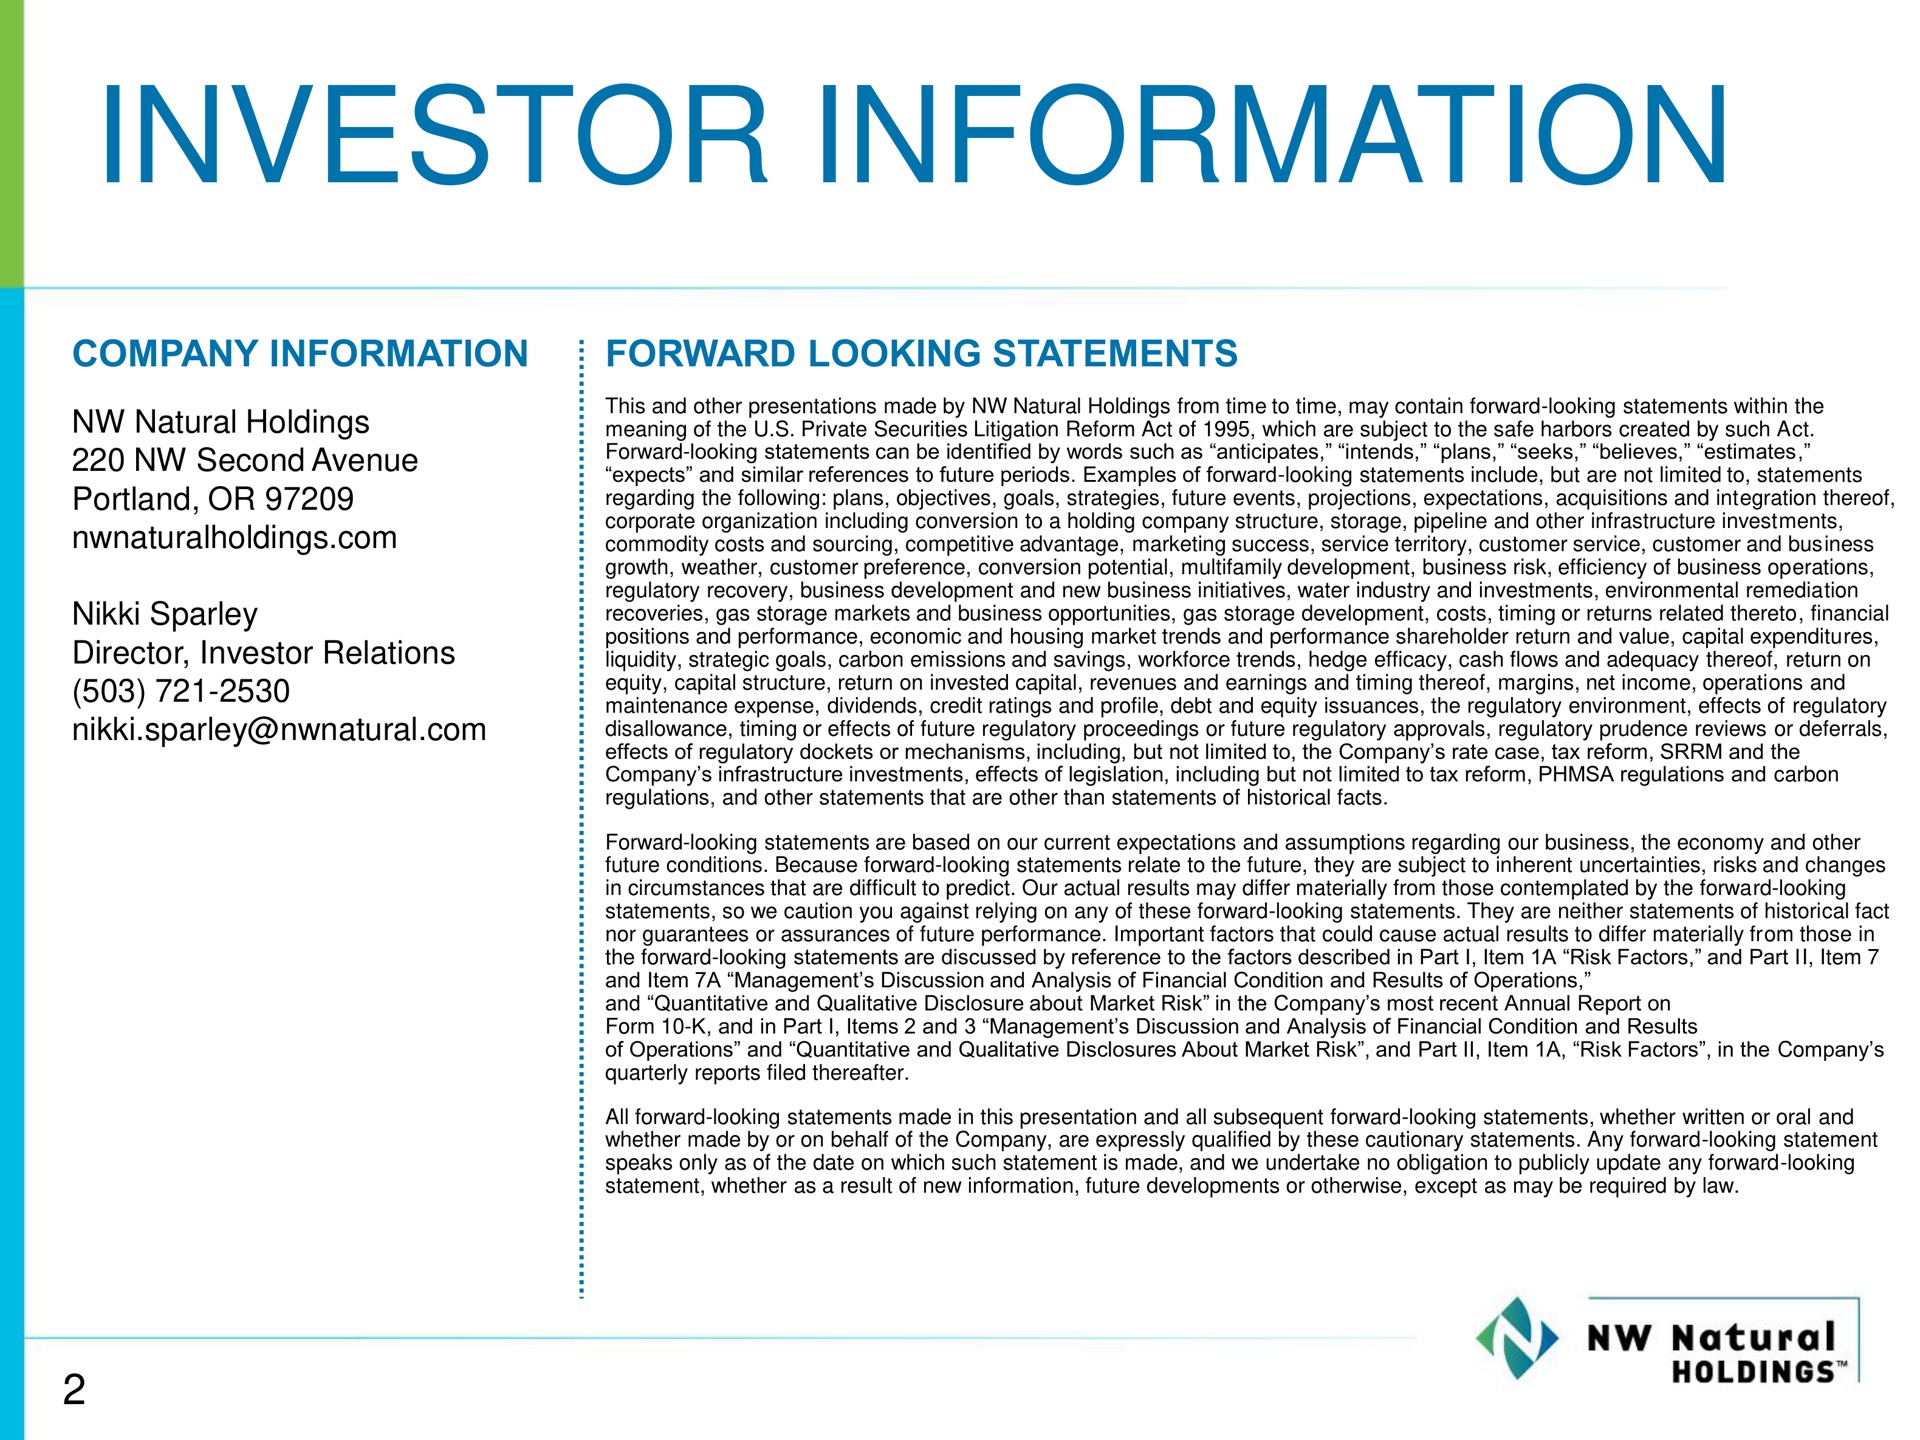 investor information | NW Natural Holdings